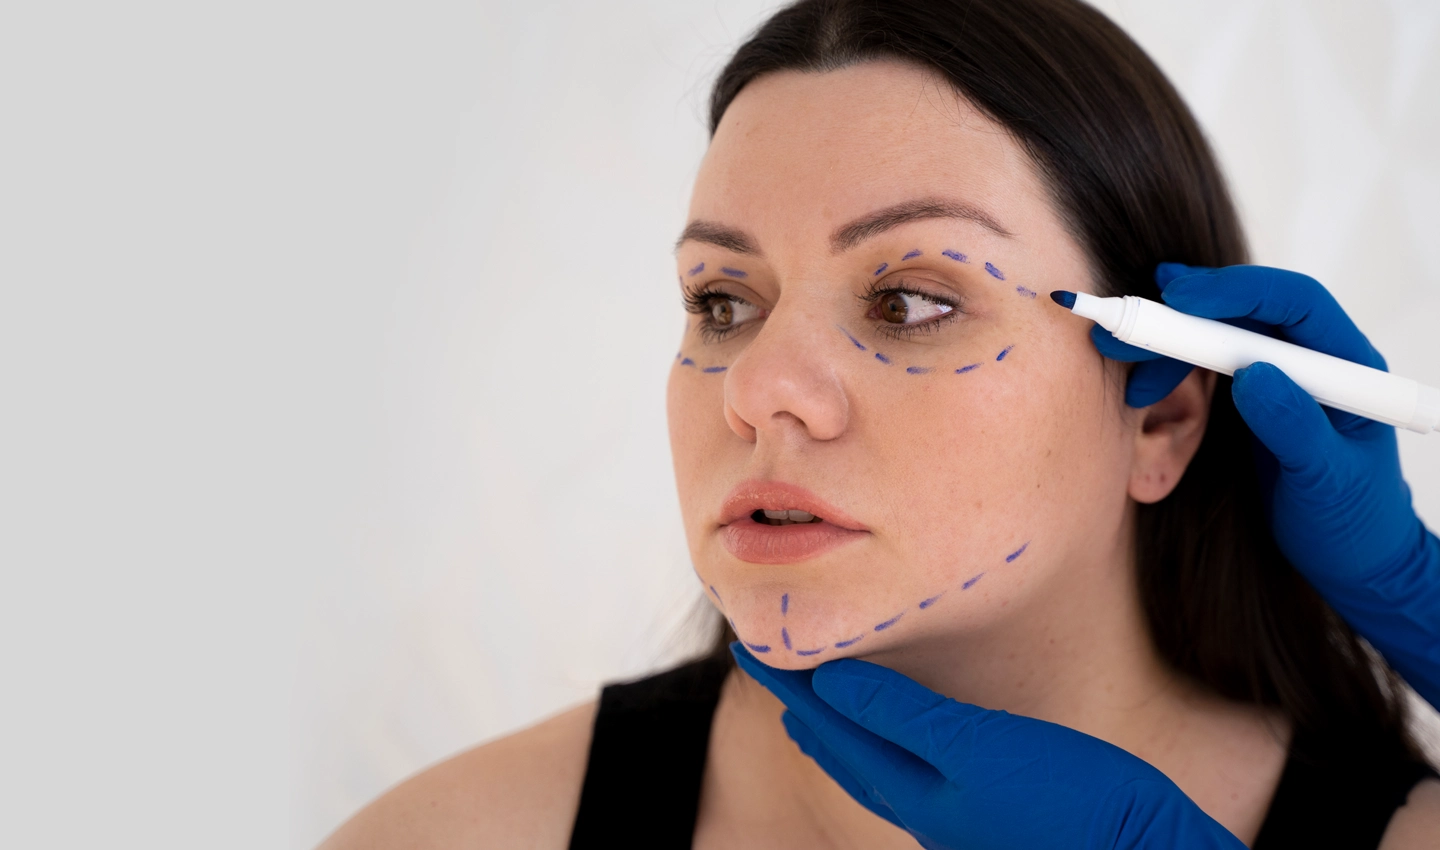 A woman prepares for a facelift and eyelid surgery procedure with a surgeon in a medical setting